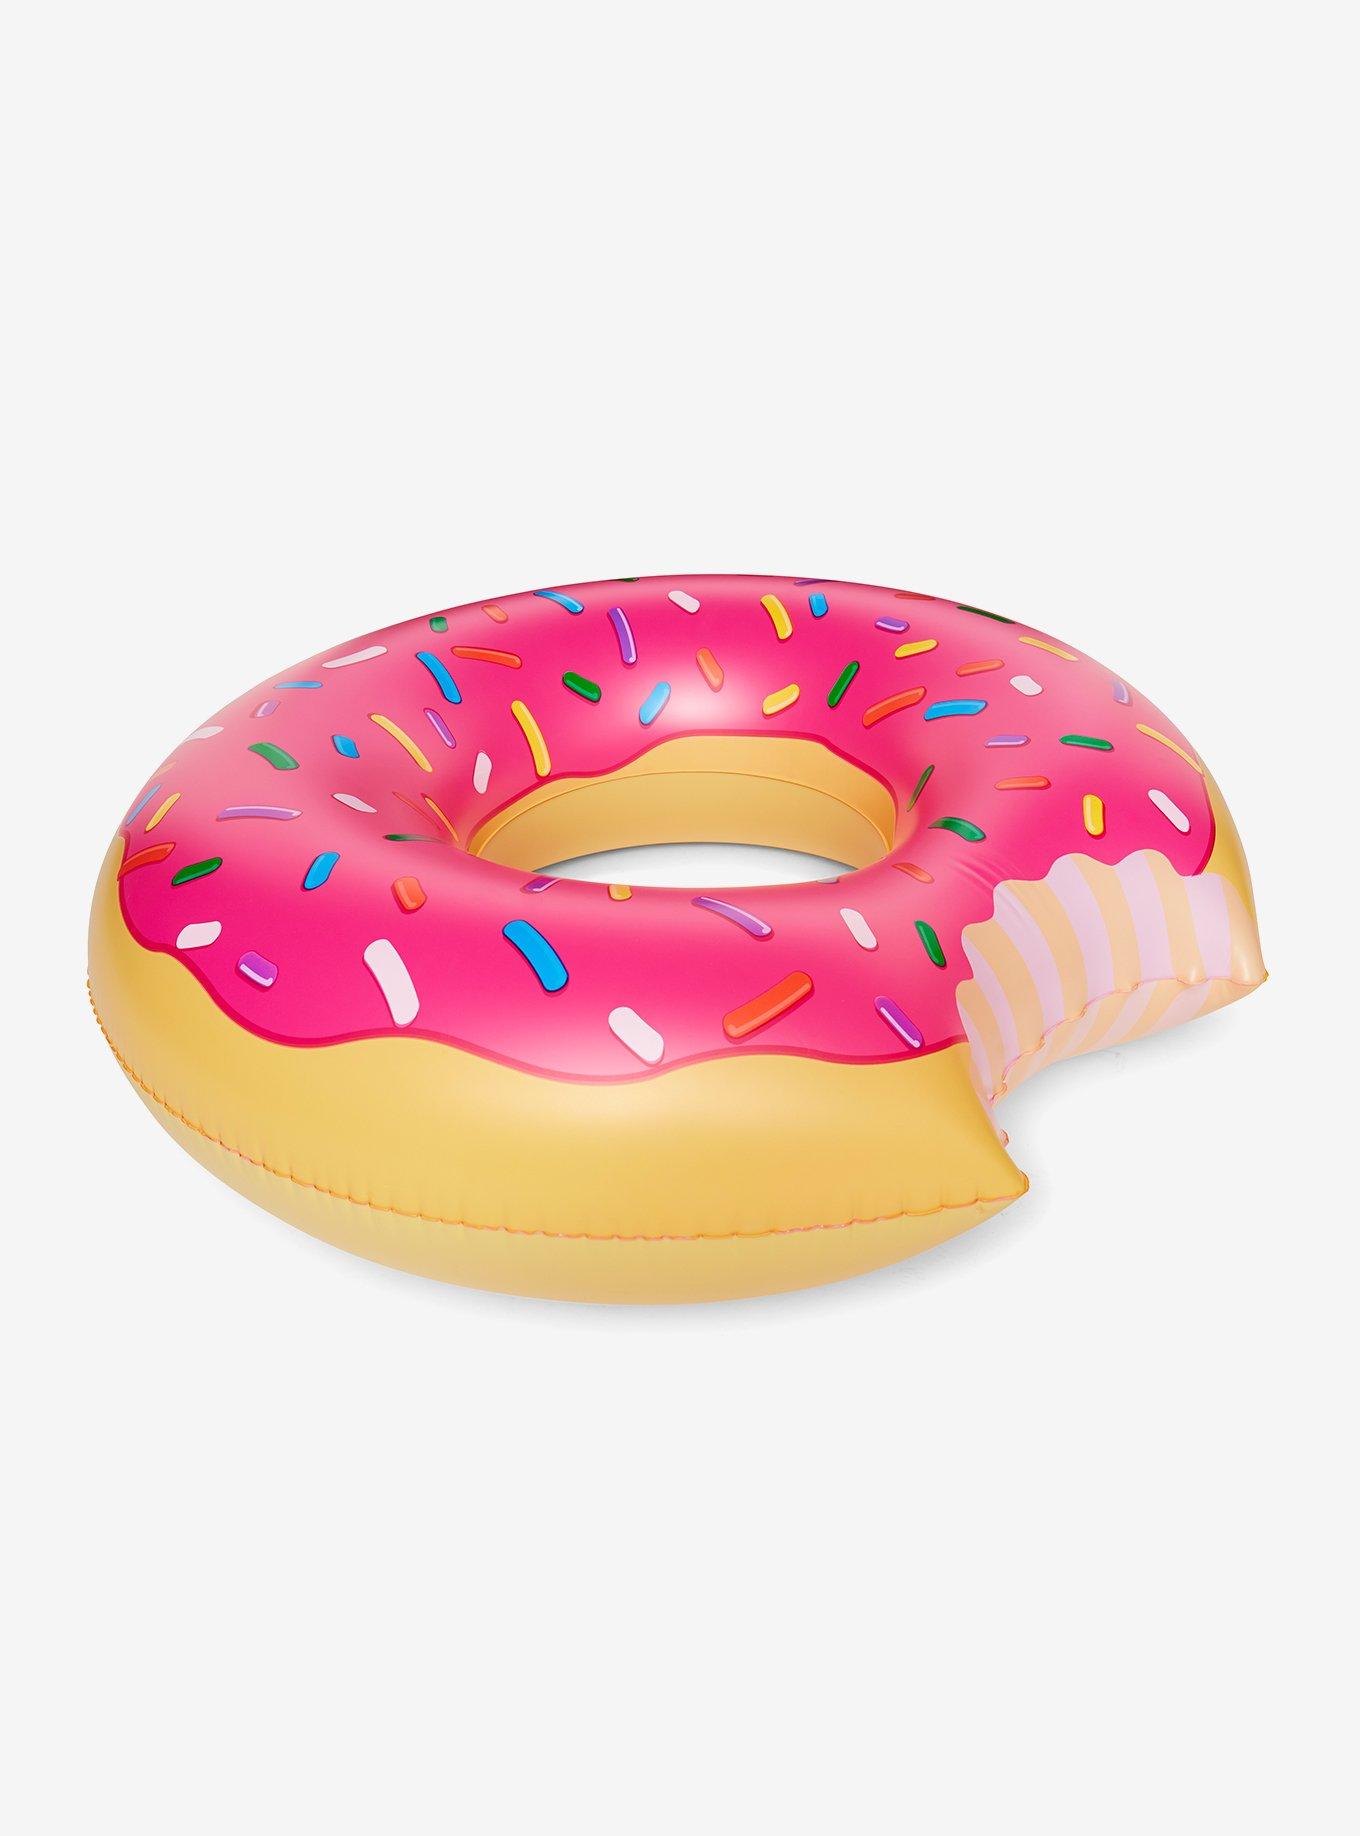 BigMouth Giant Pink Frosted Donut Pool Float, , hi-res